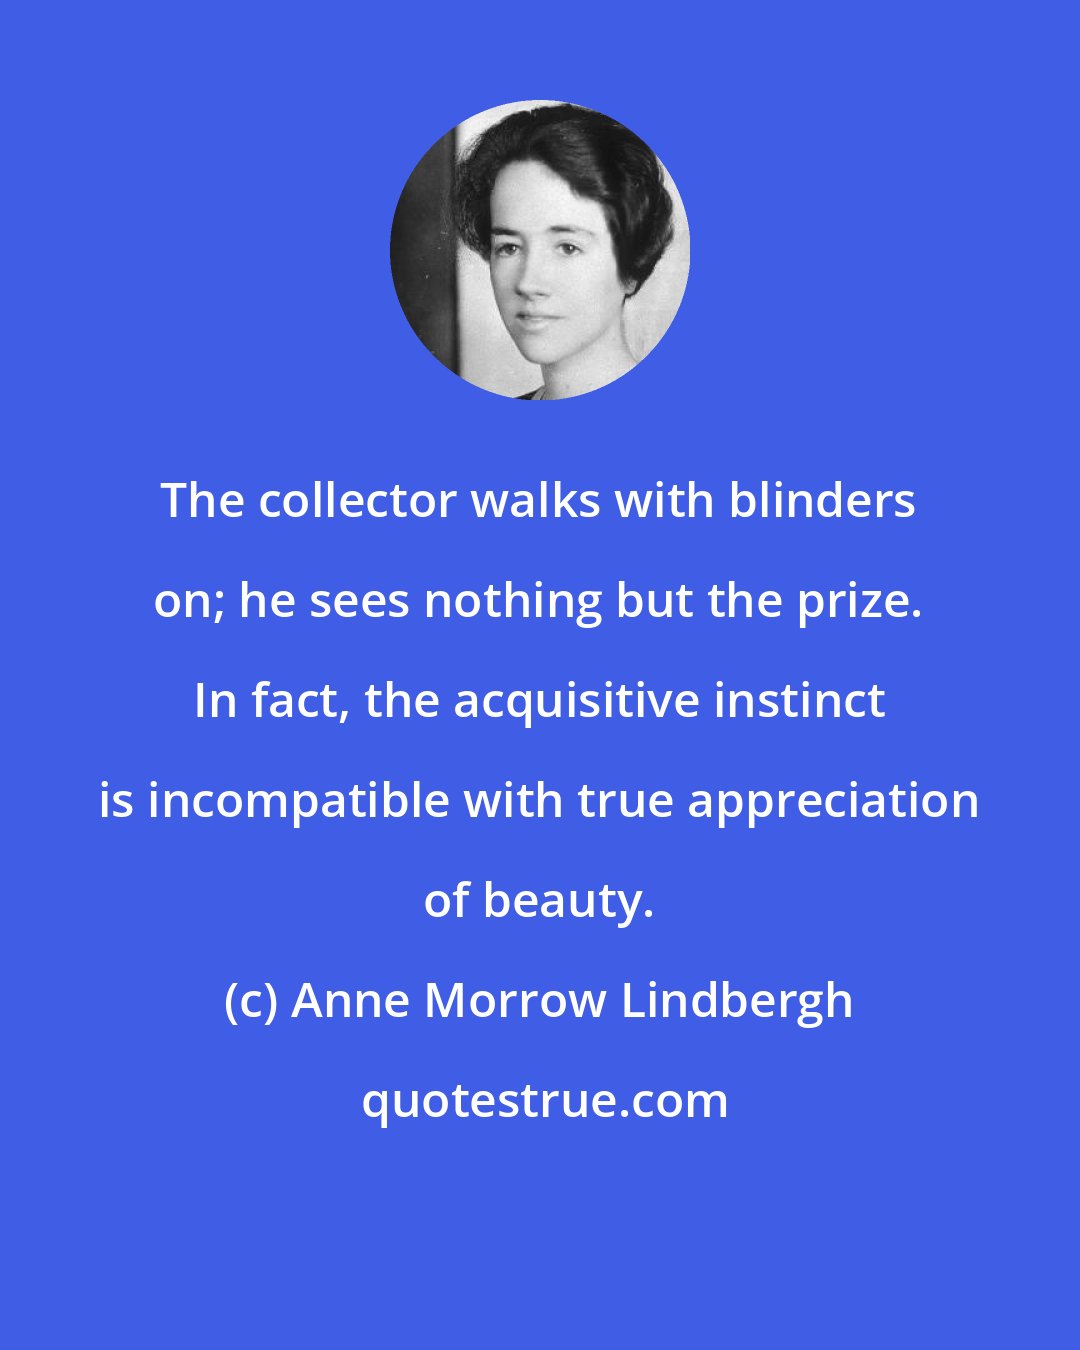 Anne Morrow Lindbergh: The collector walks with blinders on; he sees nothing but the prize. In fact, the acquisitive instinct is incompatible with true appreciation of beauty.